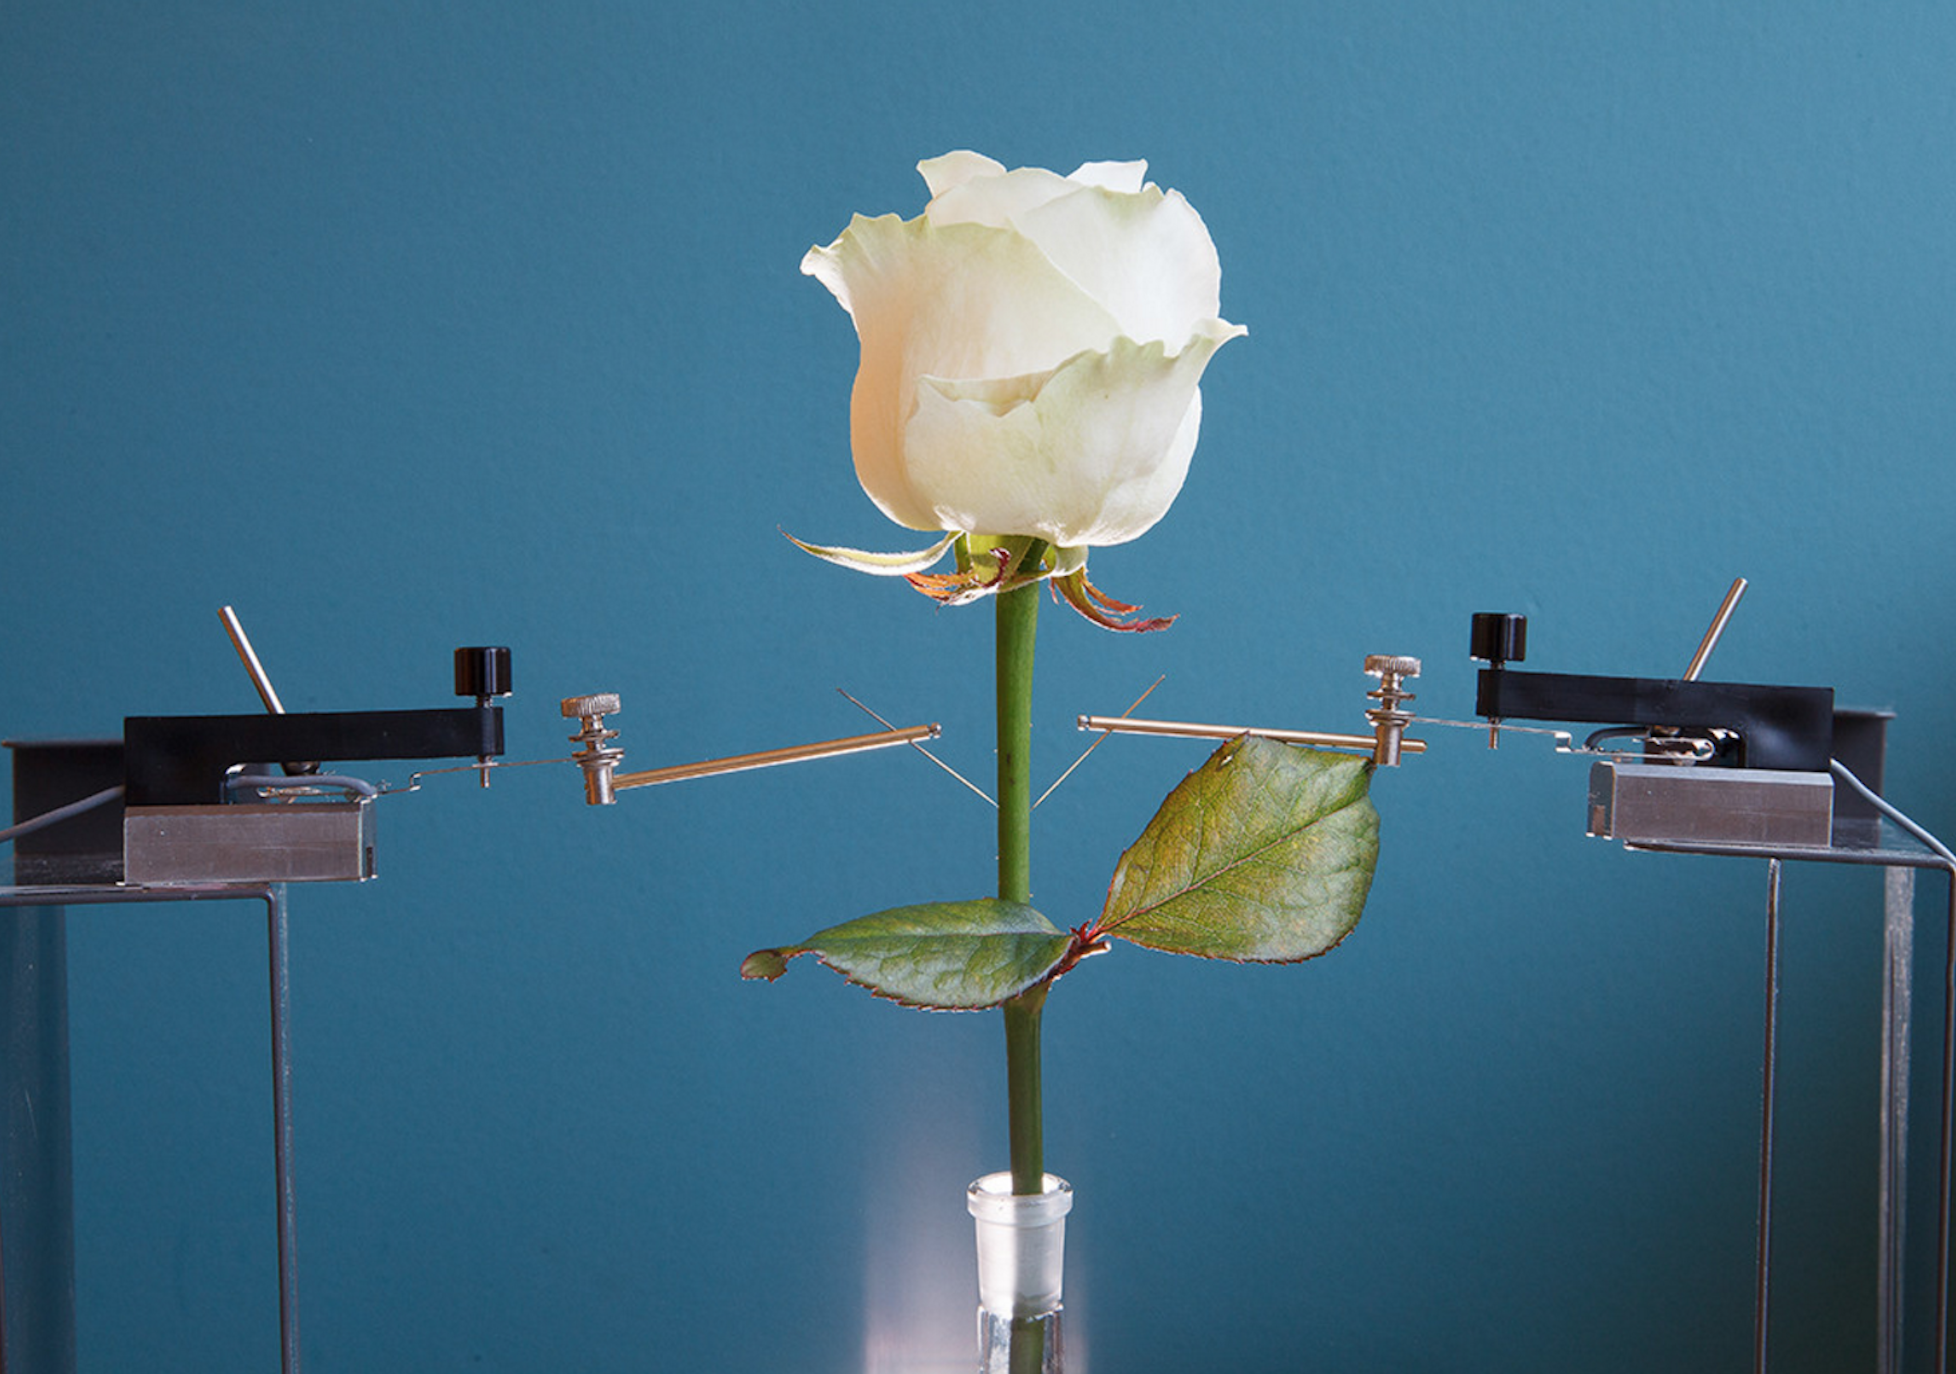 Scientists Create an Incredible Cyborg Rose with Electrical Veins and Circuits